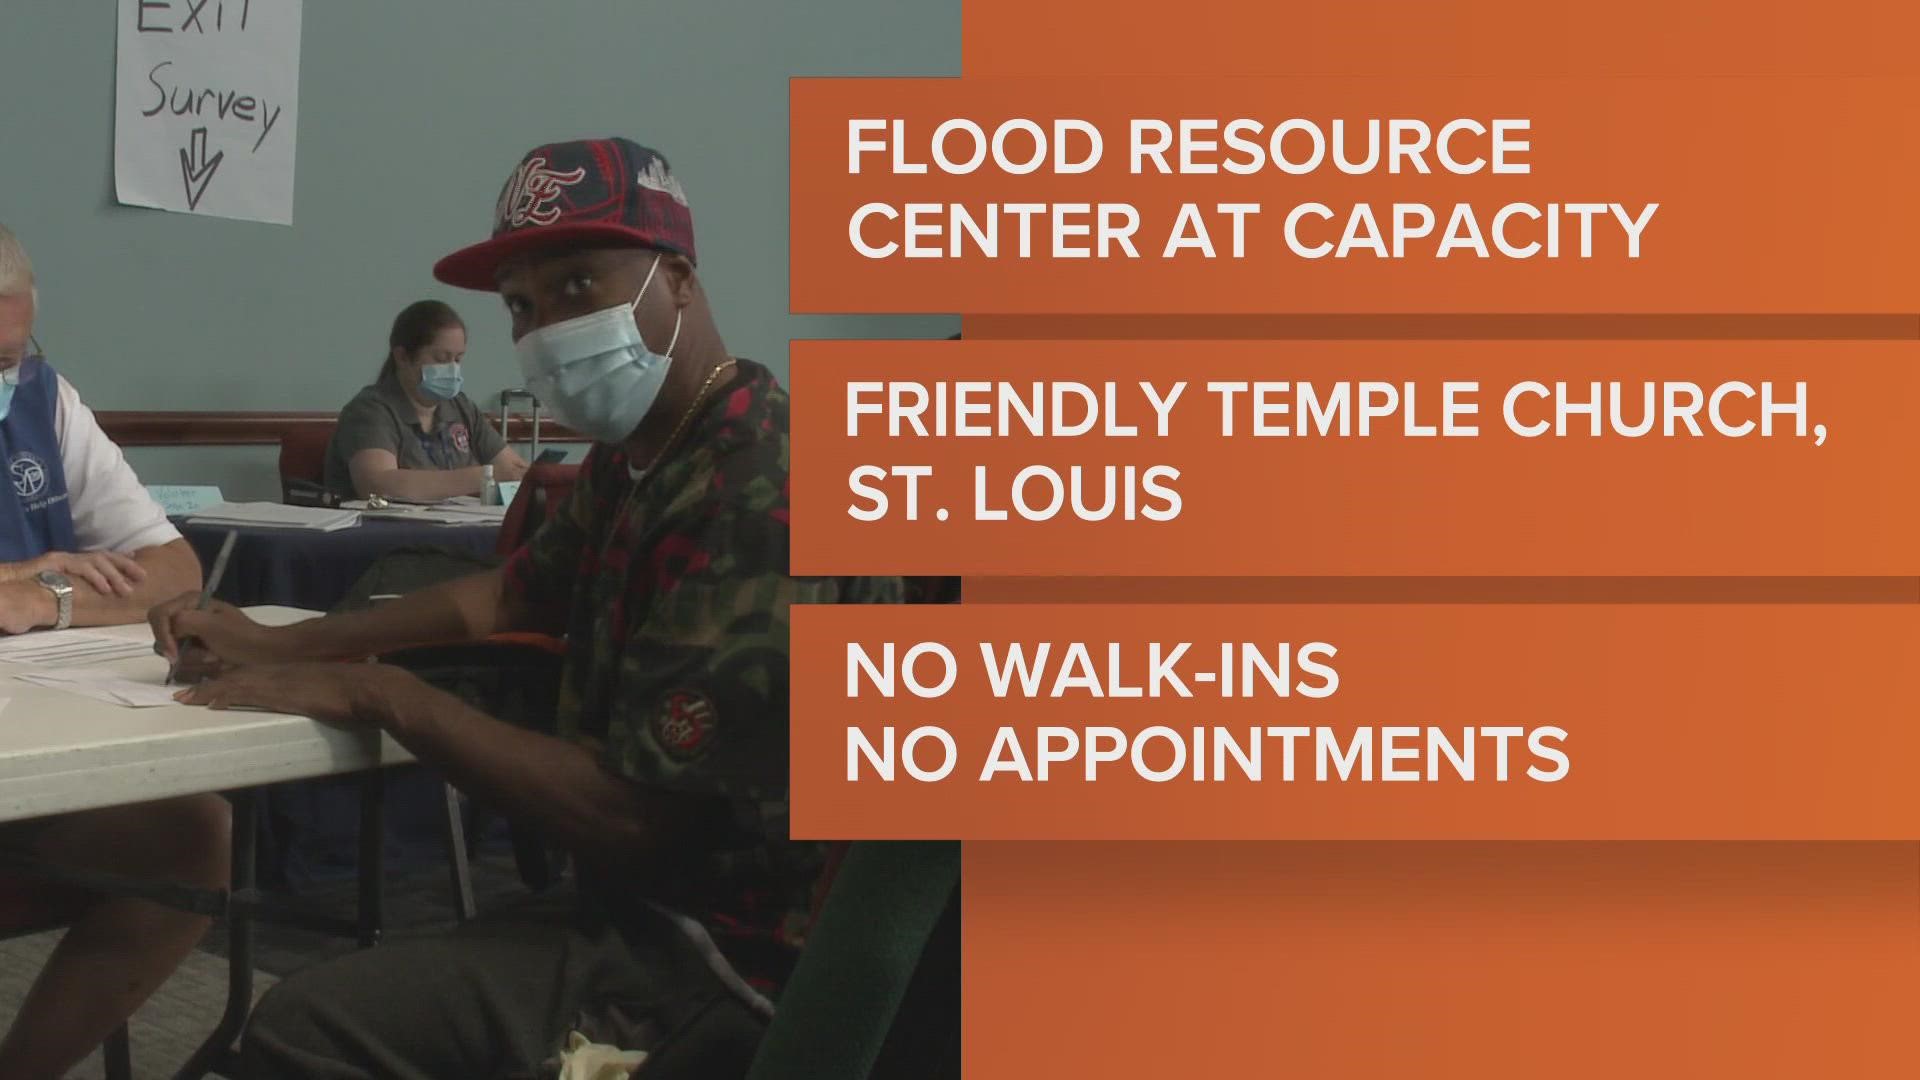 Agencies at a flood resource center say they don’t have the ability to help everyone. On-person appointments are completely booked and they can’t take walk-ins.